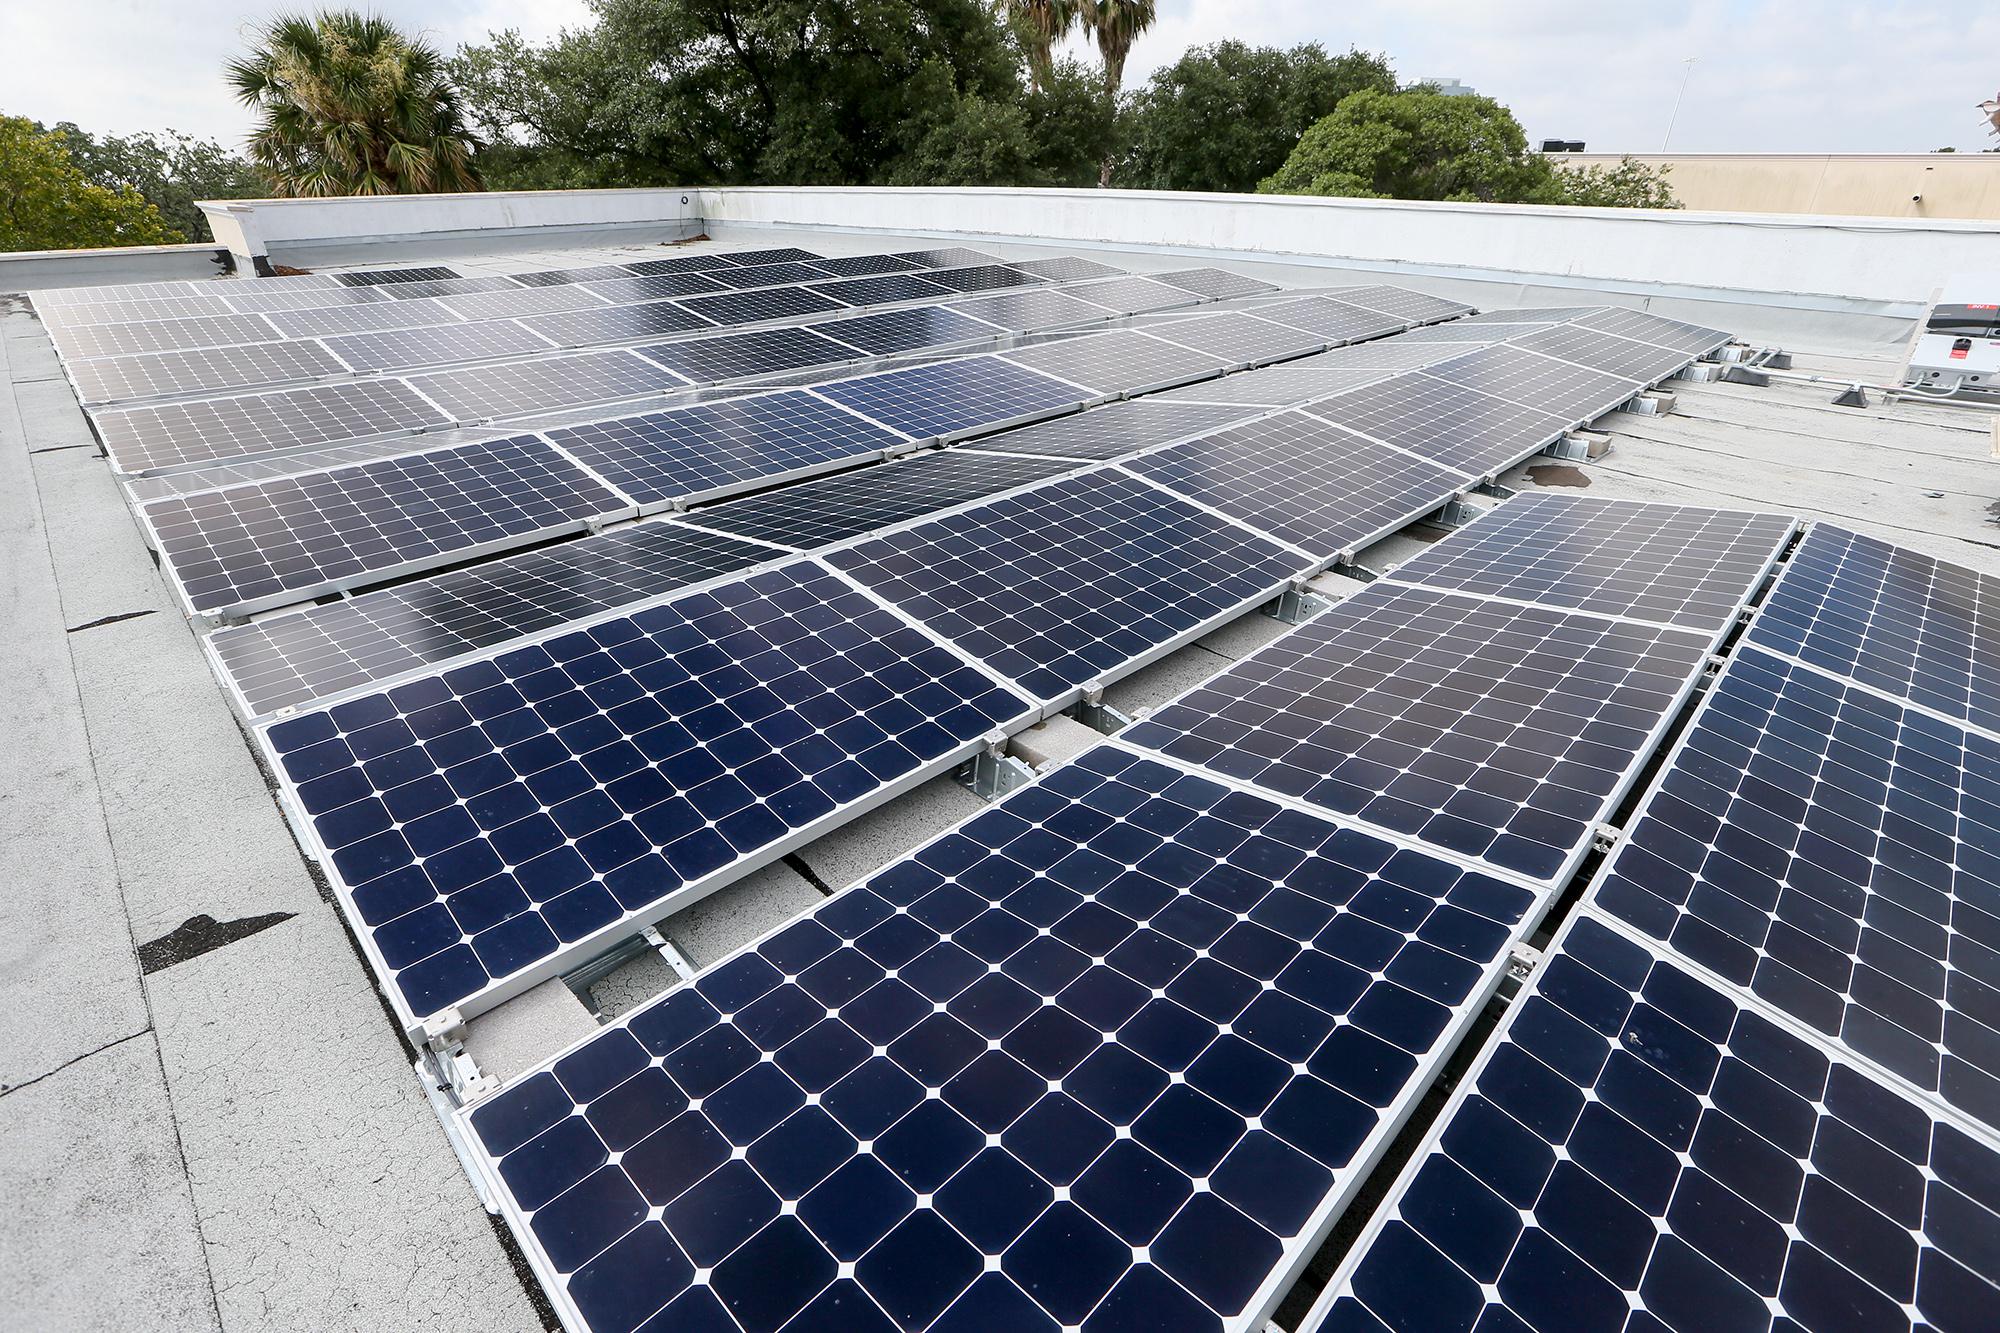 cps-energy-could-tap-into-commercial-solar-rebate-funds-for-residential-projects